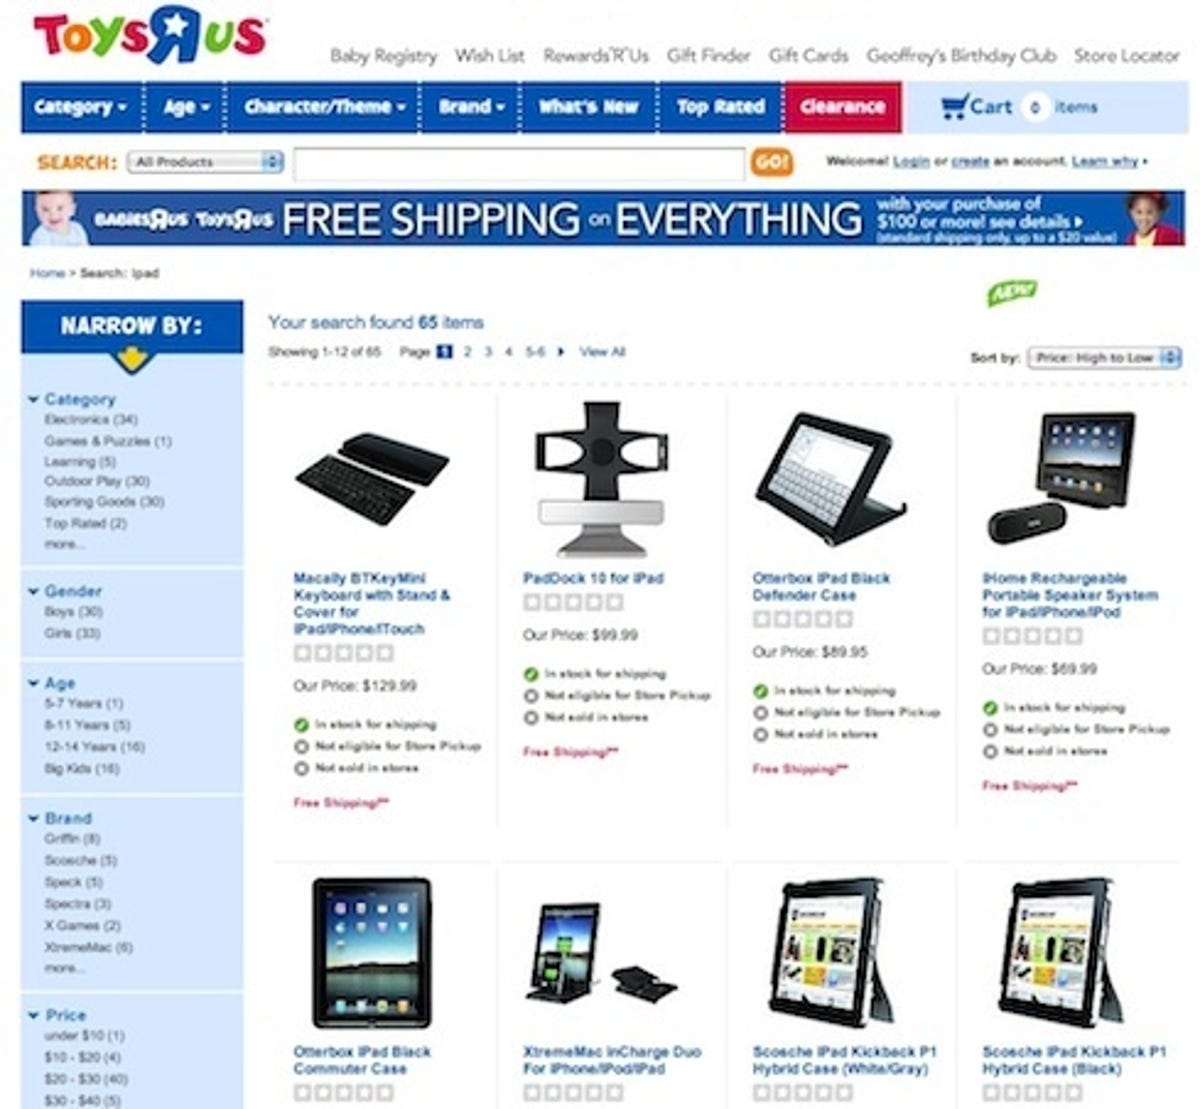 Toys R Us already sells a ton of iPad accessories.  But in-store availability of the actual device is very limited.